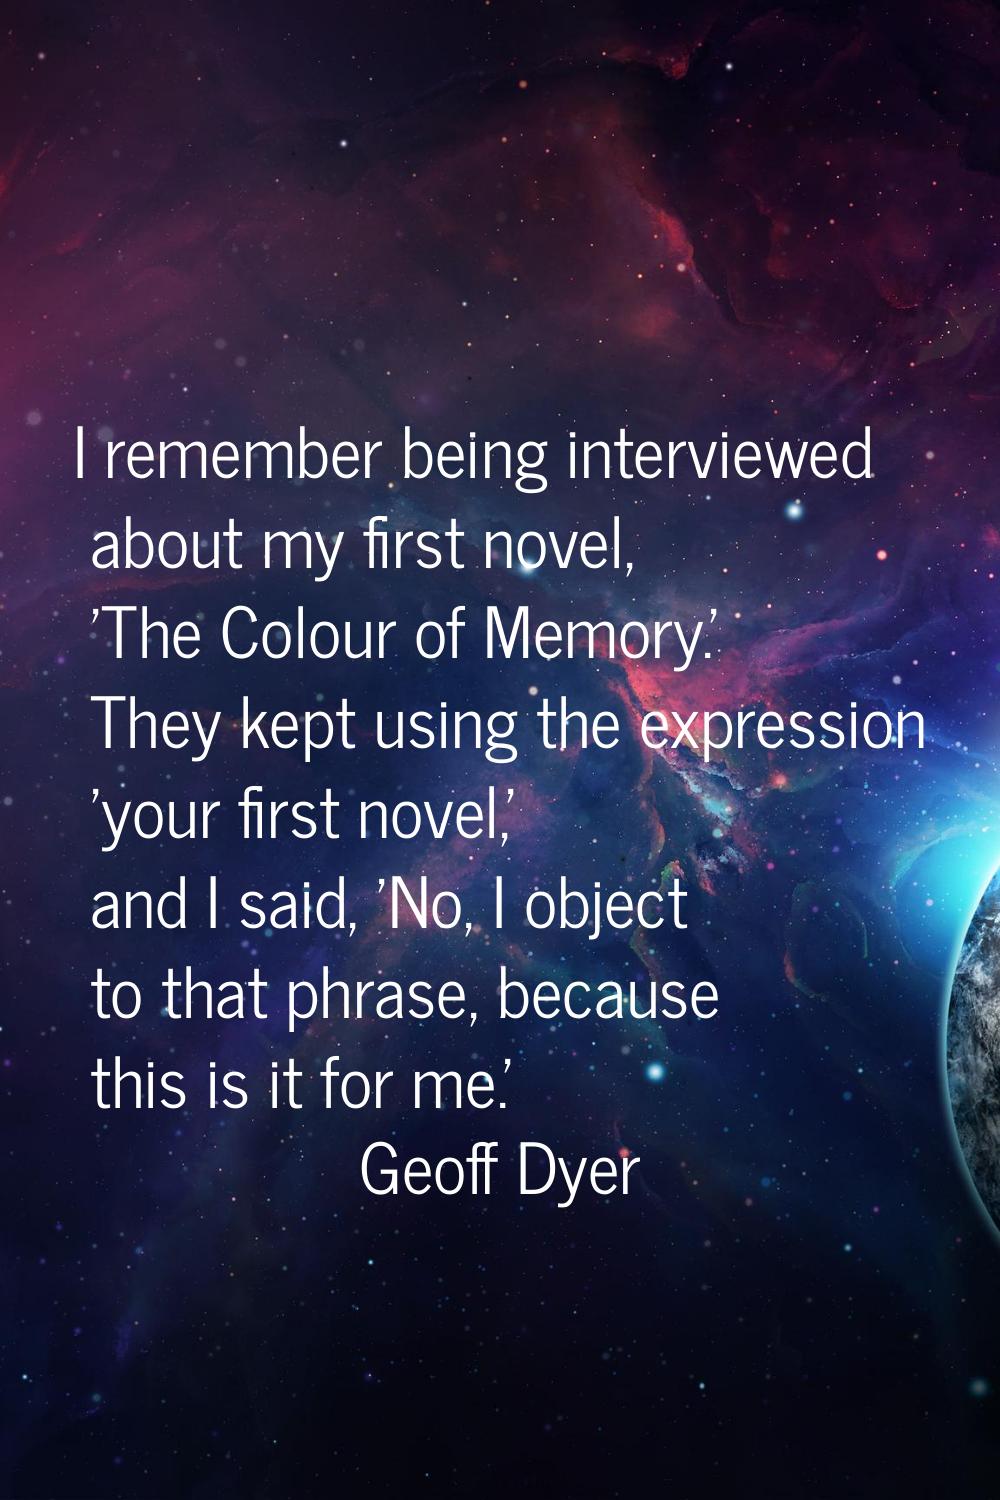 I remember being interviewed about my first novel, 'The Colour of Memory.' They kept using the expr